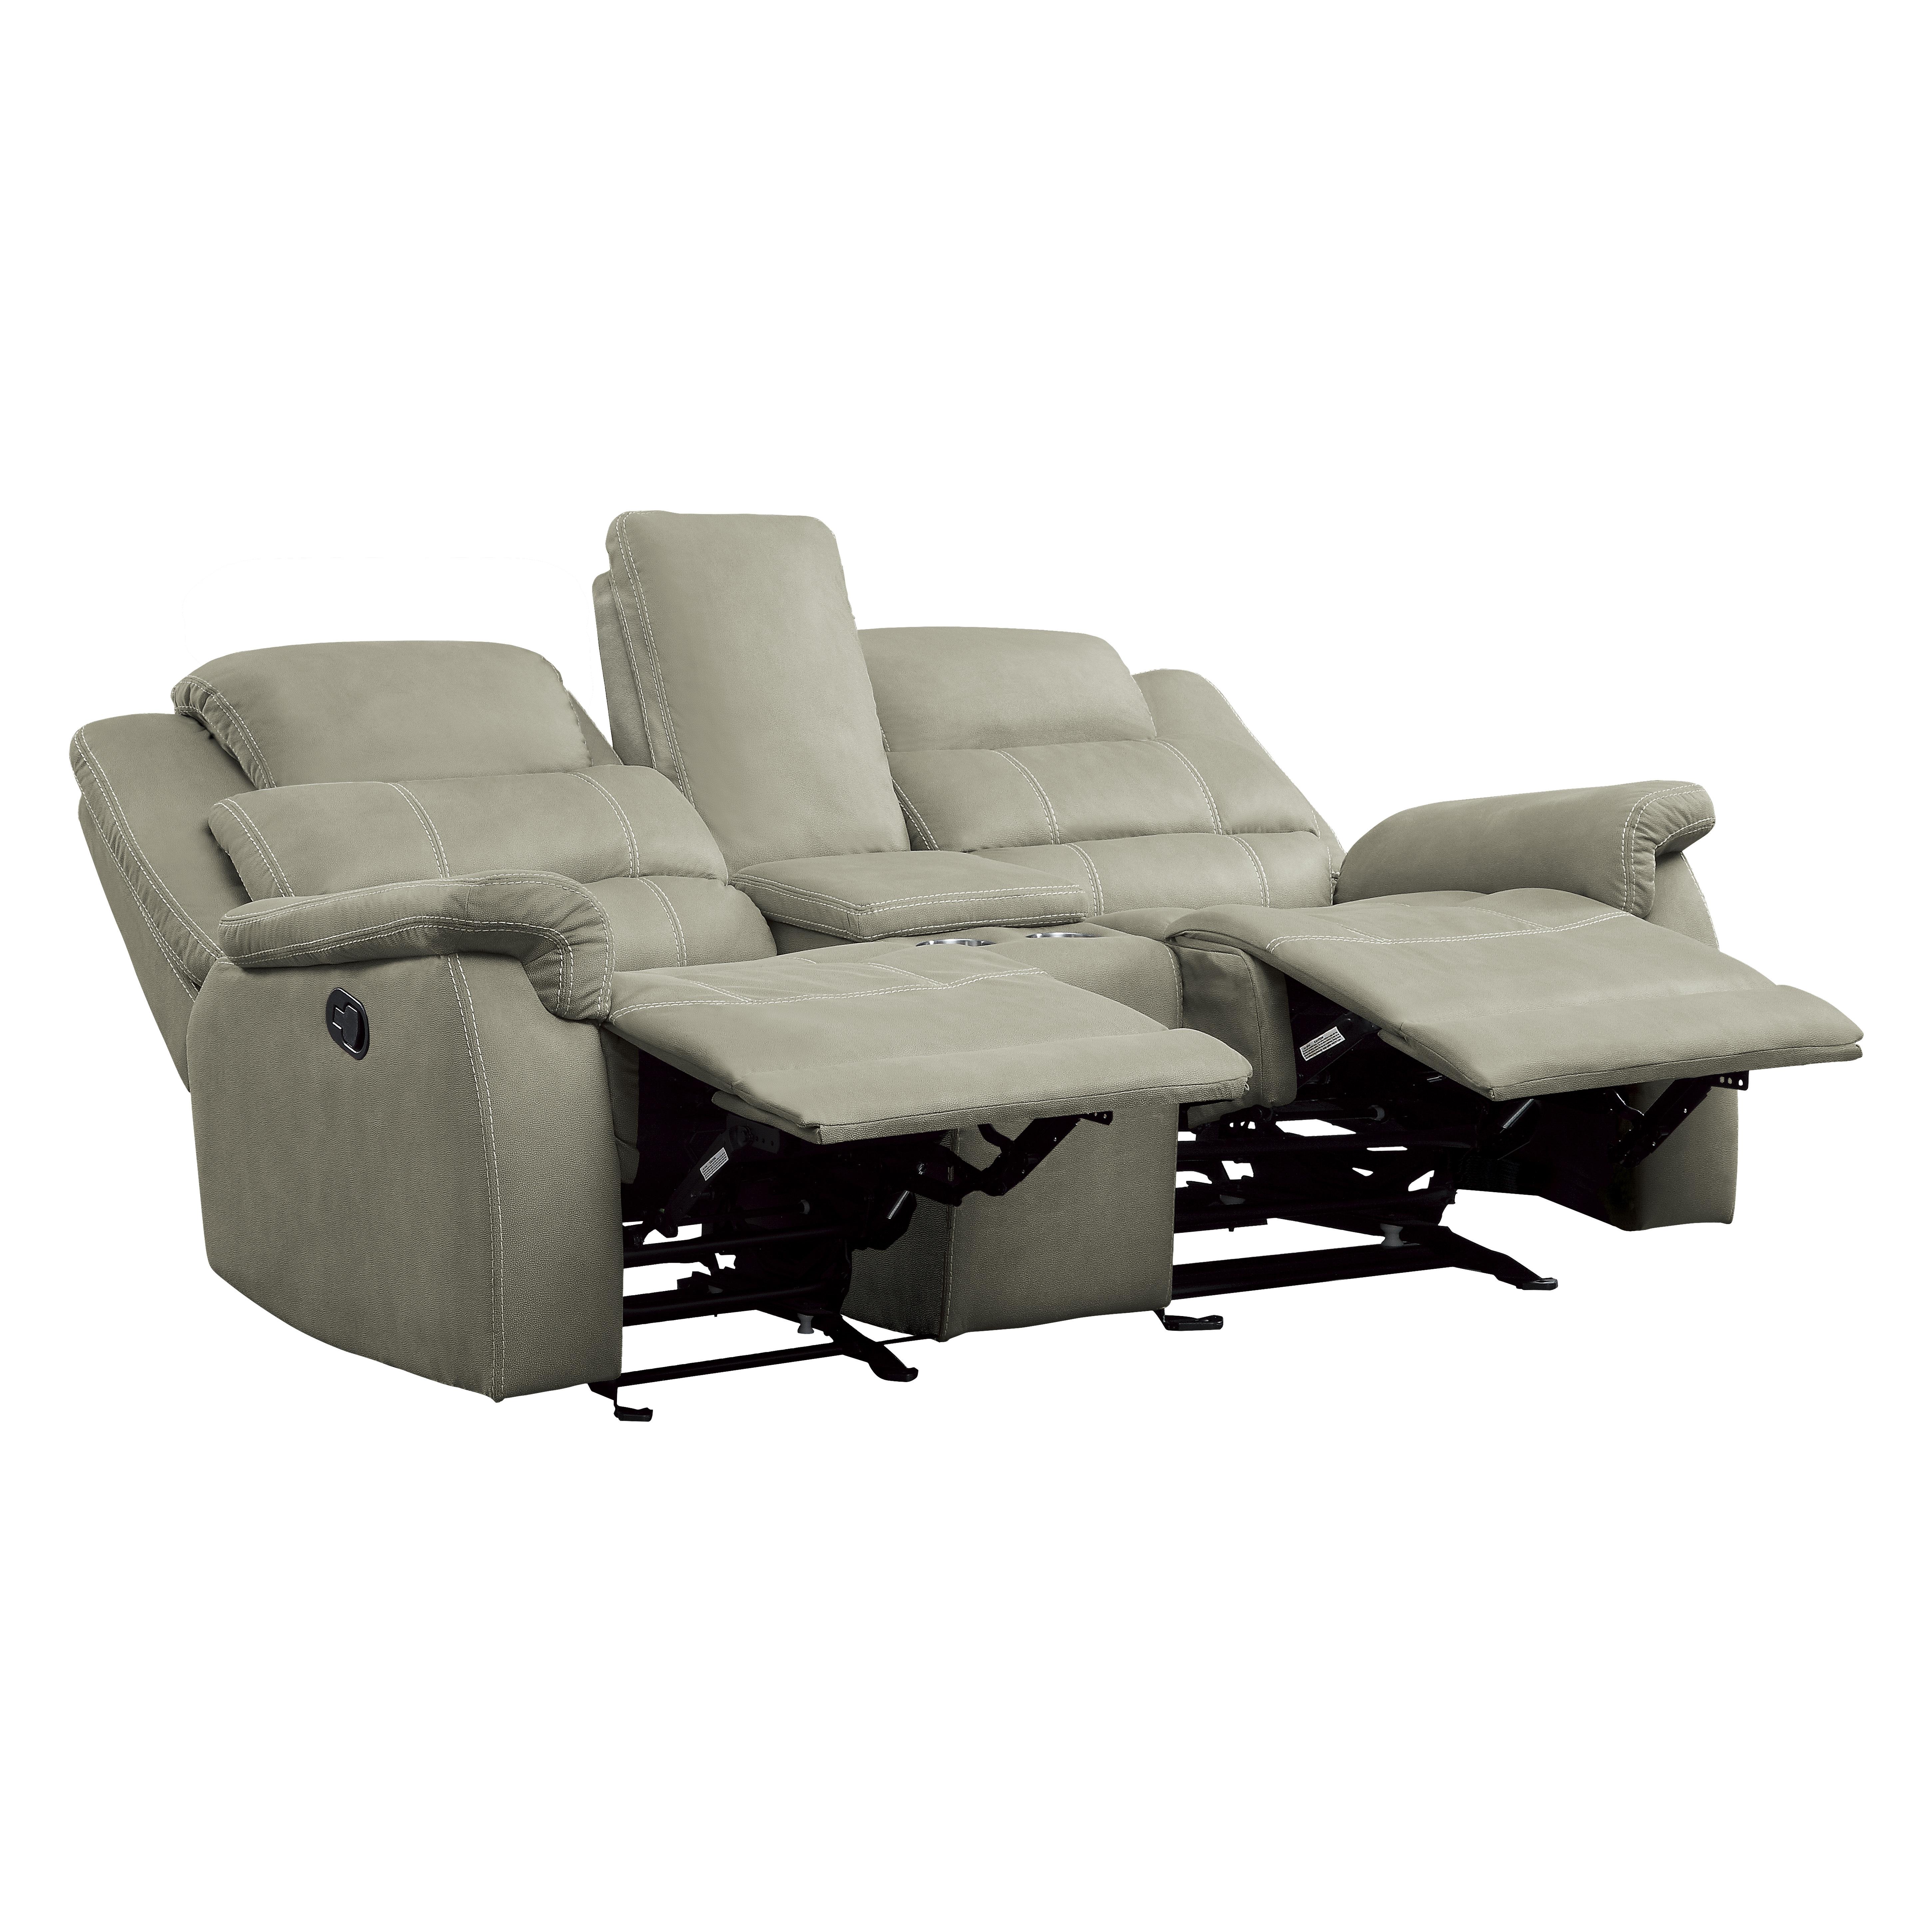 

    
Homelegance 9848GY-2 Shola Reclining Loveseat Gray 9848GY-2
